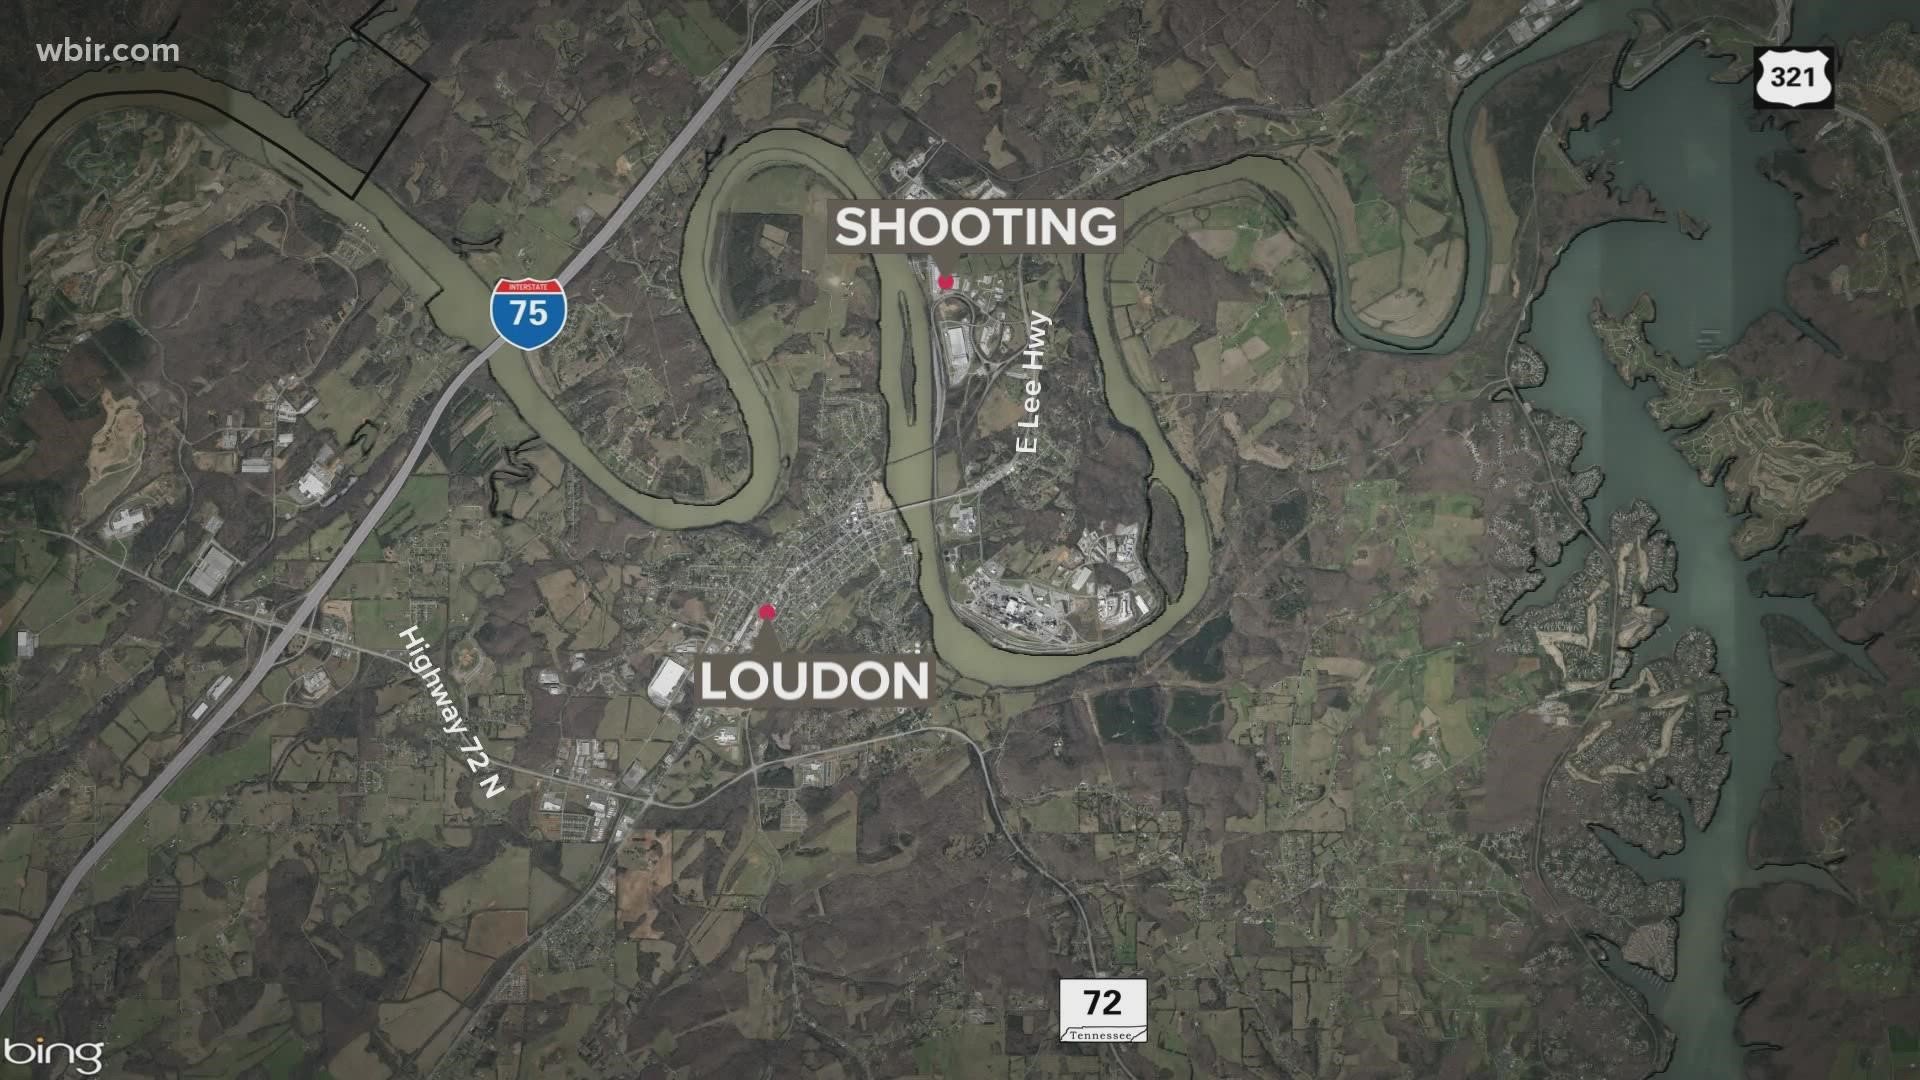 Officials said the situation escalated, and a Loudon police officer shot at him. No officers or deputies were hurt during the incident.